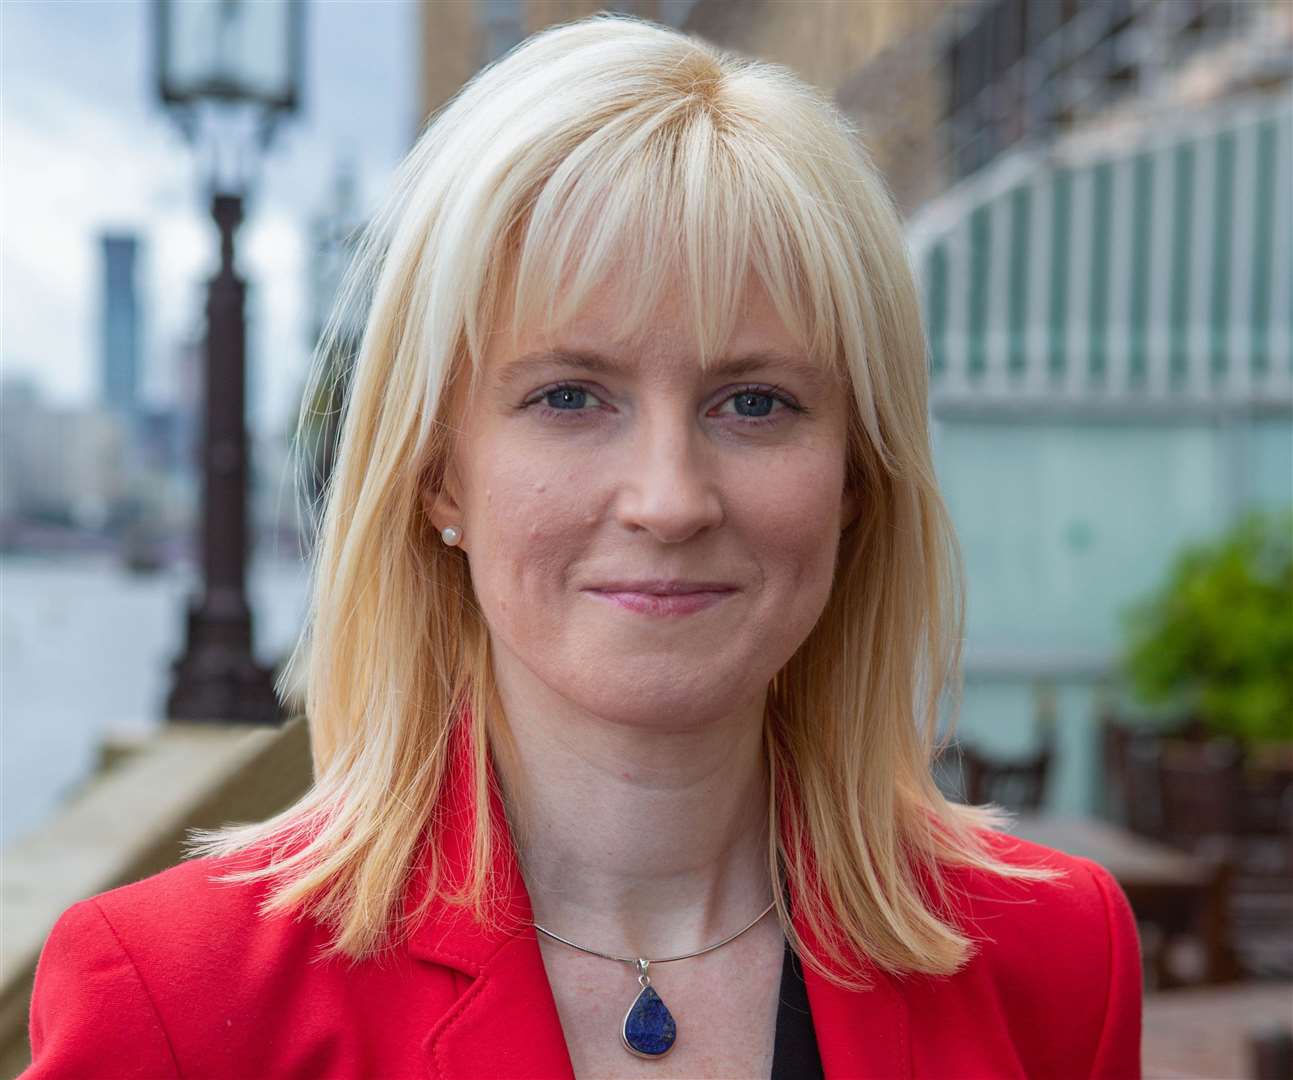 Labour MP for Cantrbury, Rosie Duffield, is set to meet with Miss Hirst this month